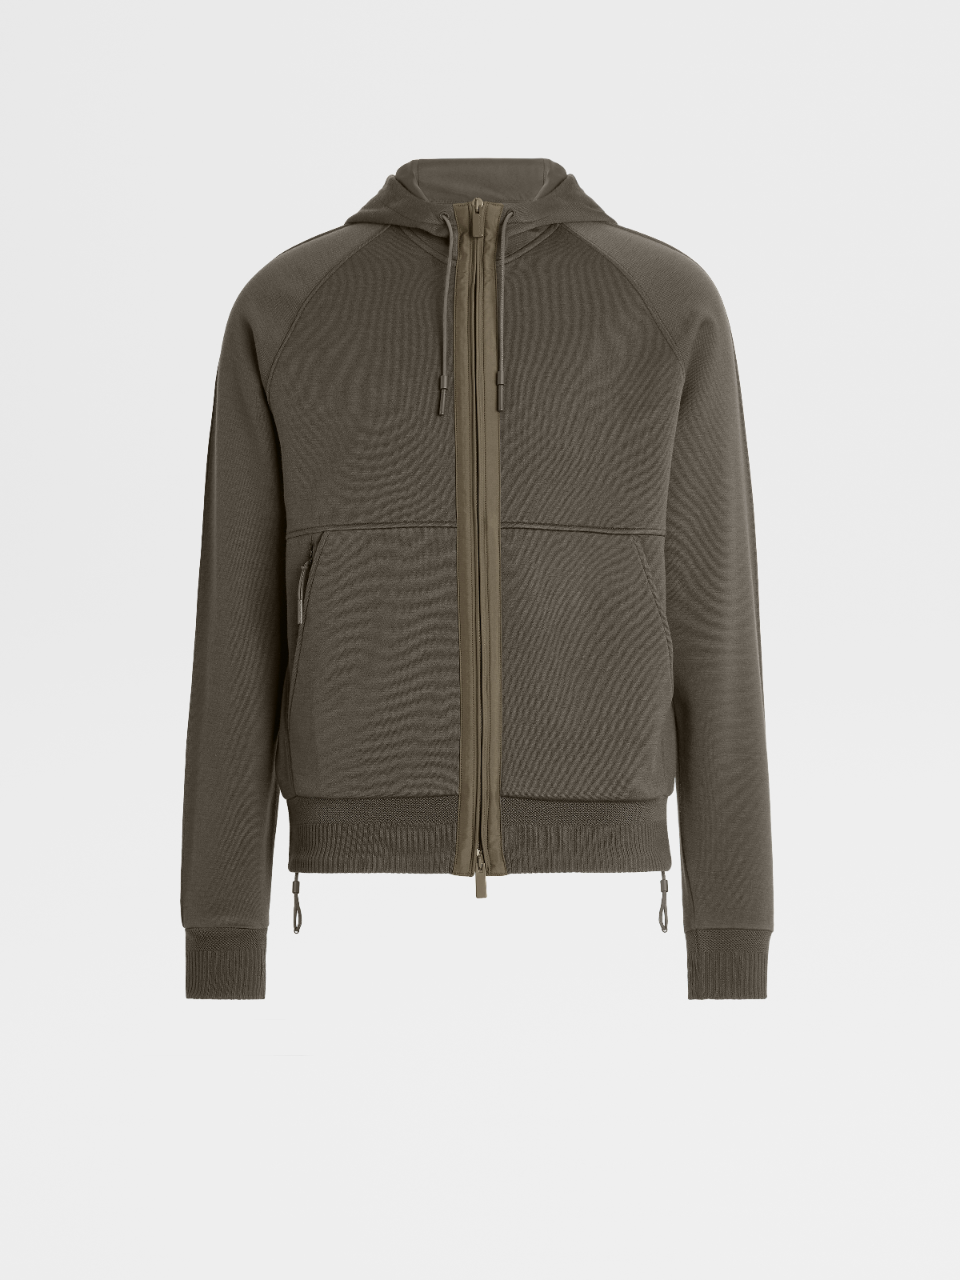 High Performance™ Wool and Spacer Cotton Hooded Full Zip Sweatshirt